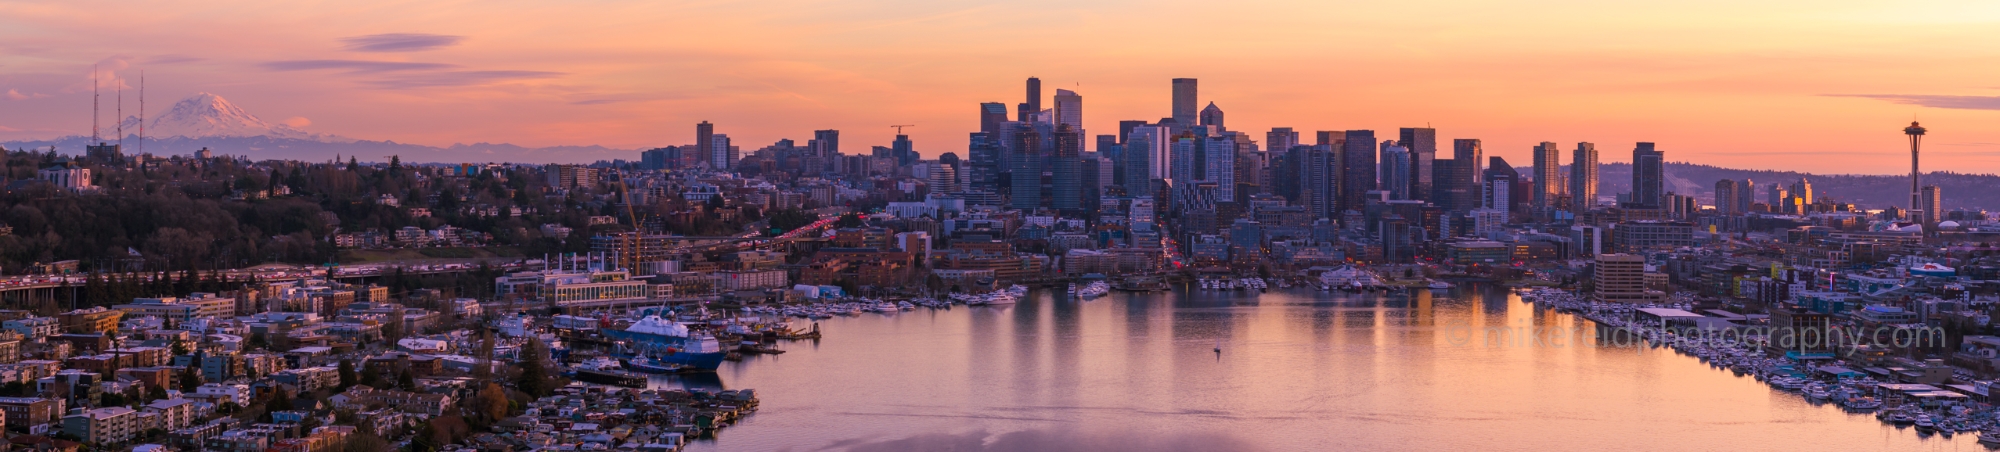 Over Seattle and Lake Union Sunset Panorama.jpg